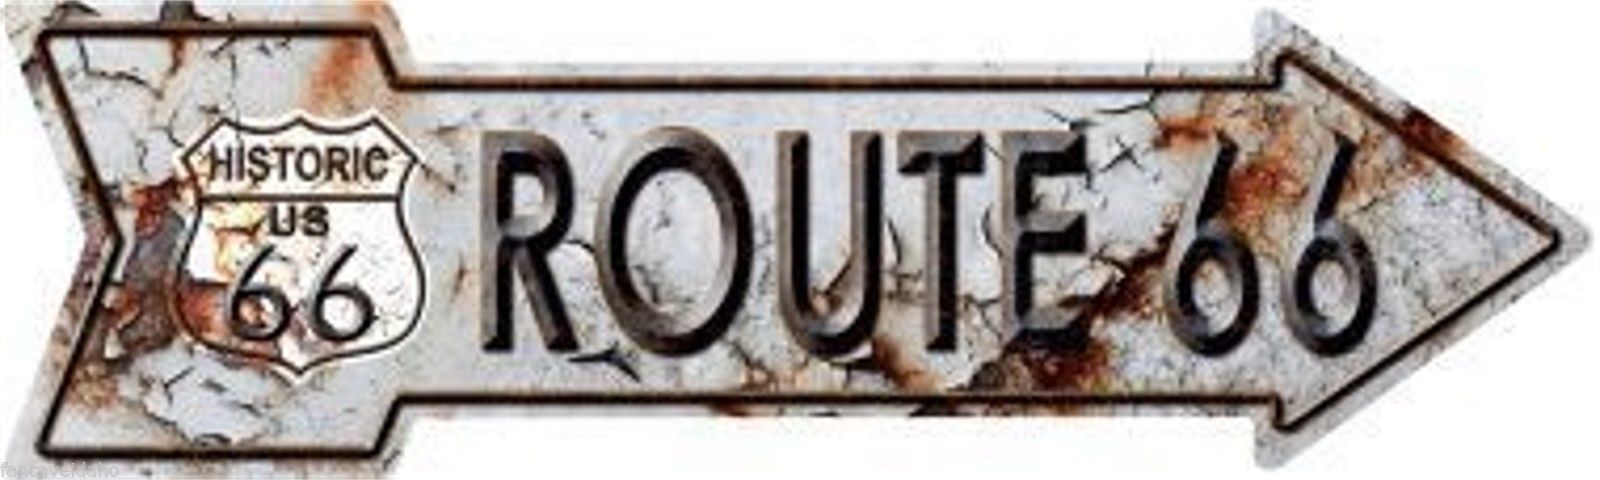 Rustic Look Route 66 Novelty Metal Arrow Sign 17" x 5" Wall Decor - $15.95